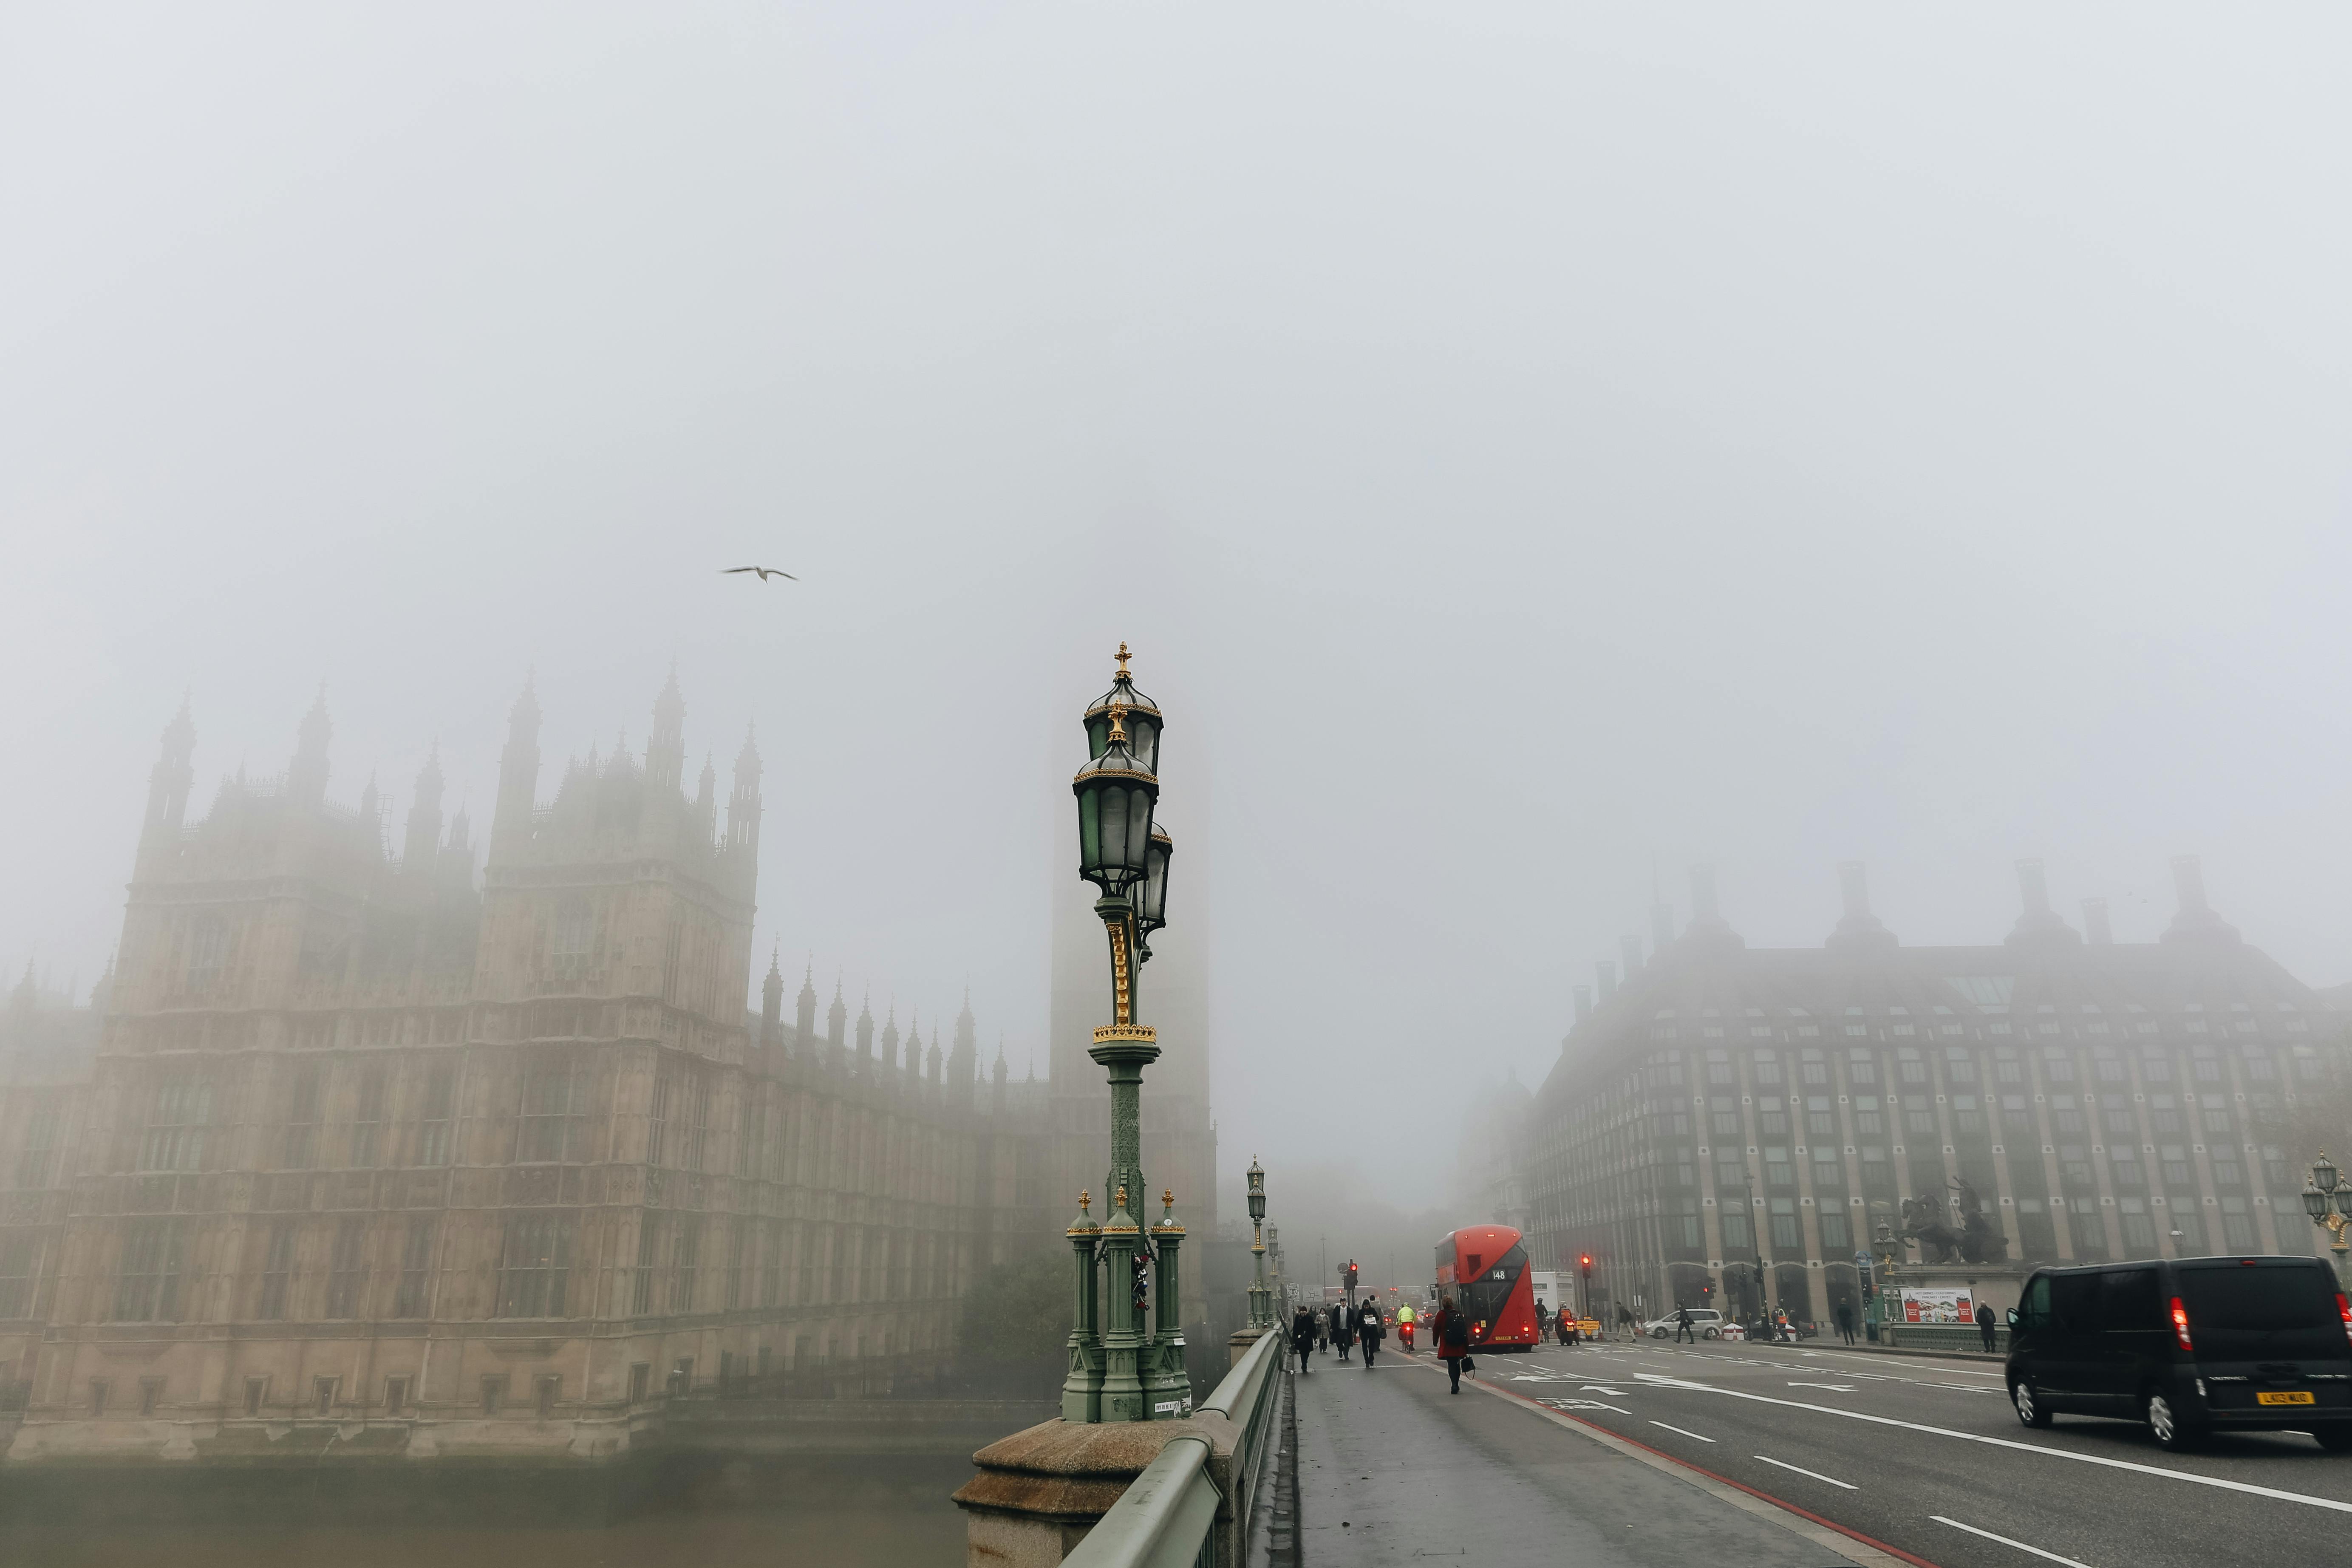 Houses of Parliament blanketed in smog in London